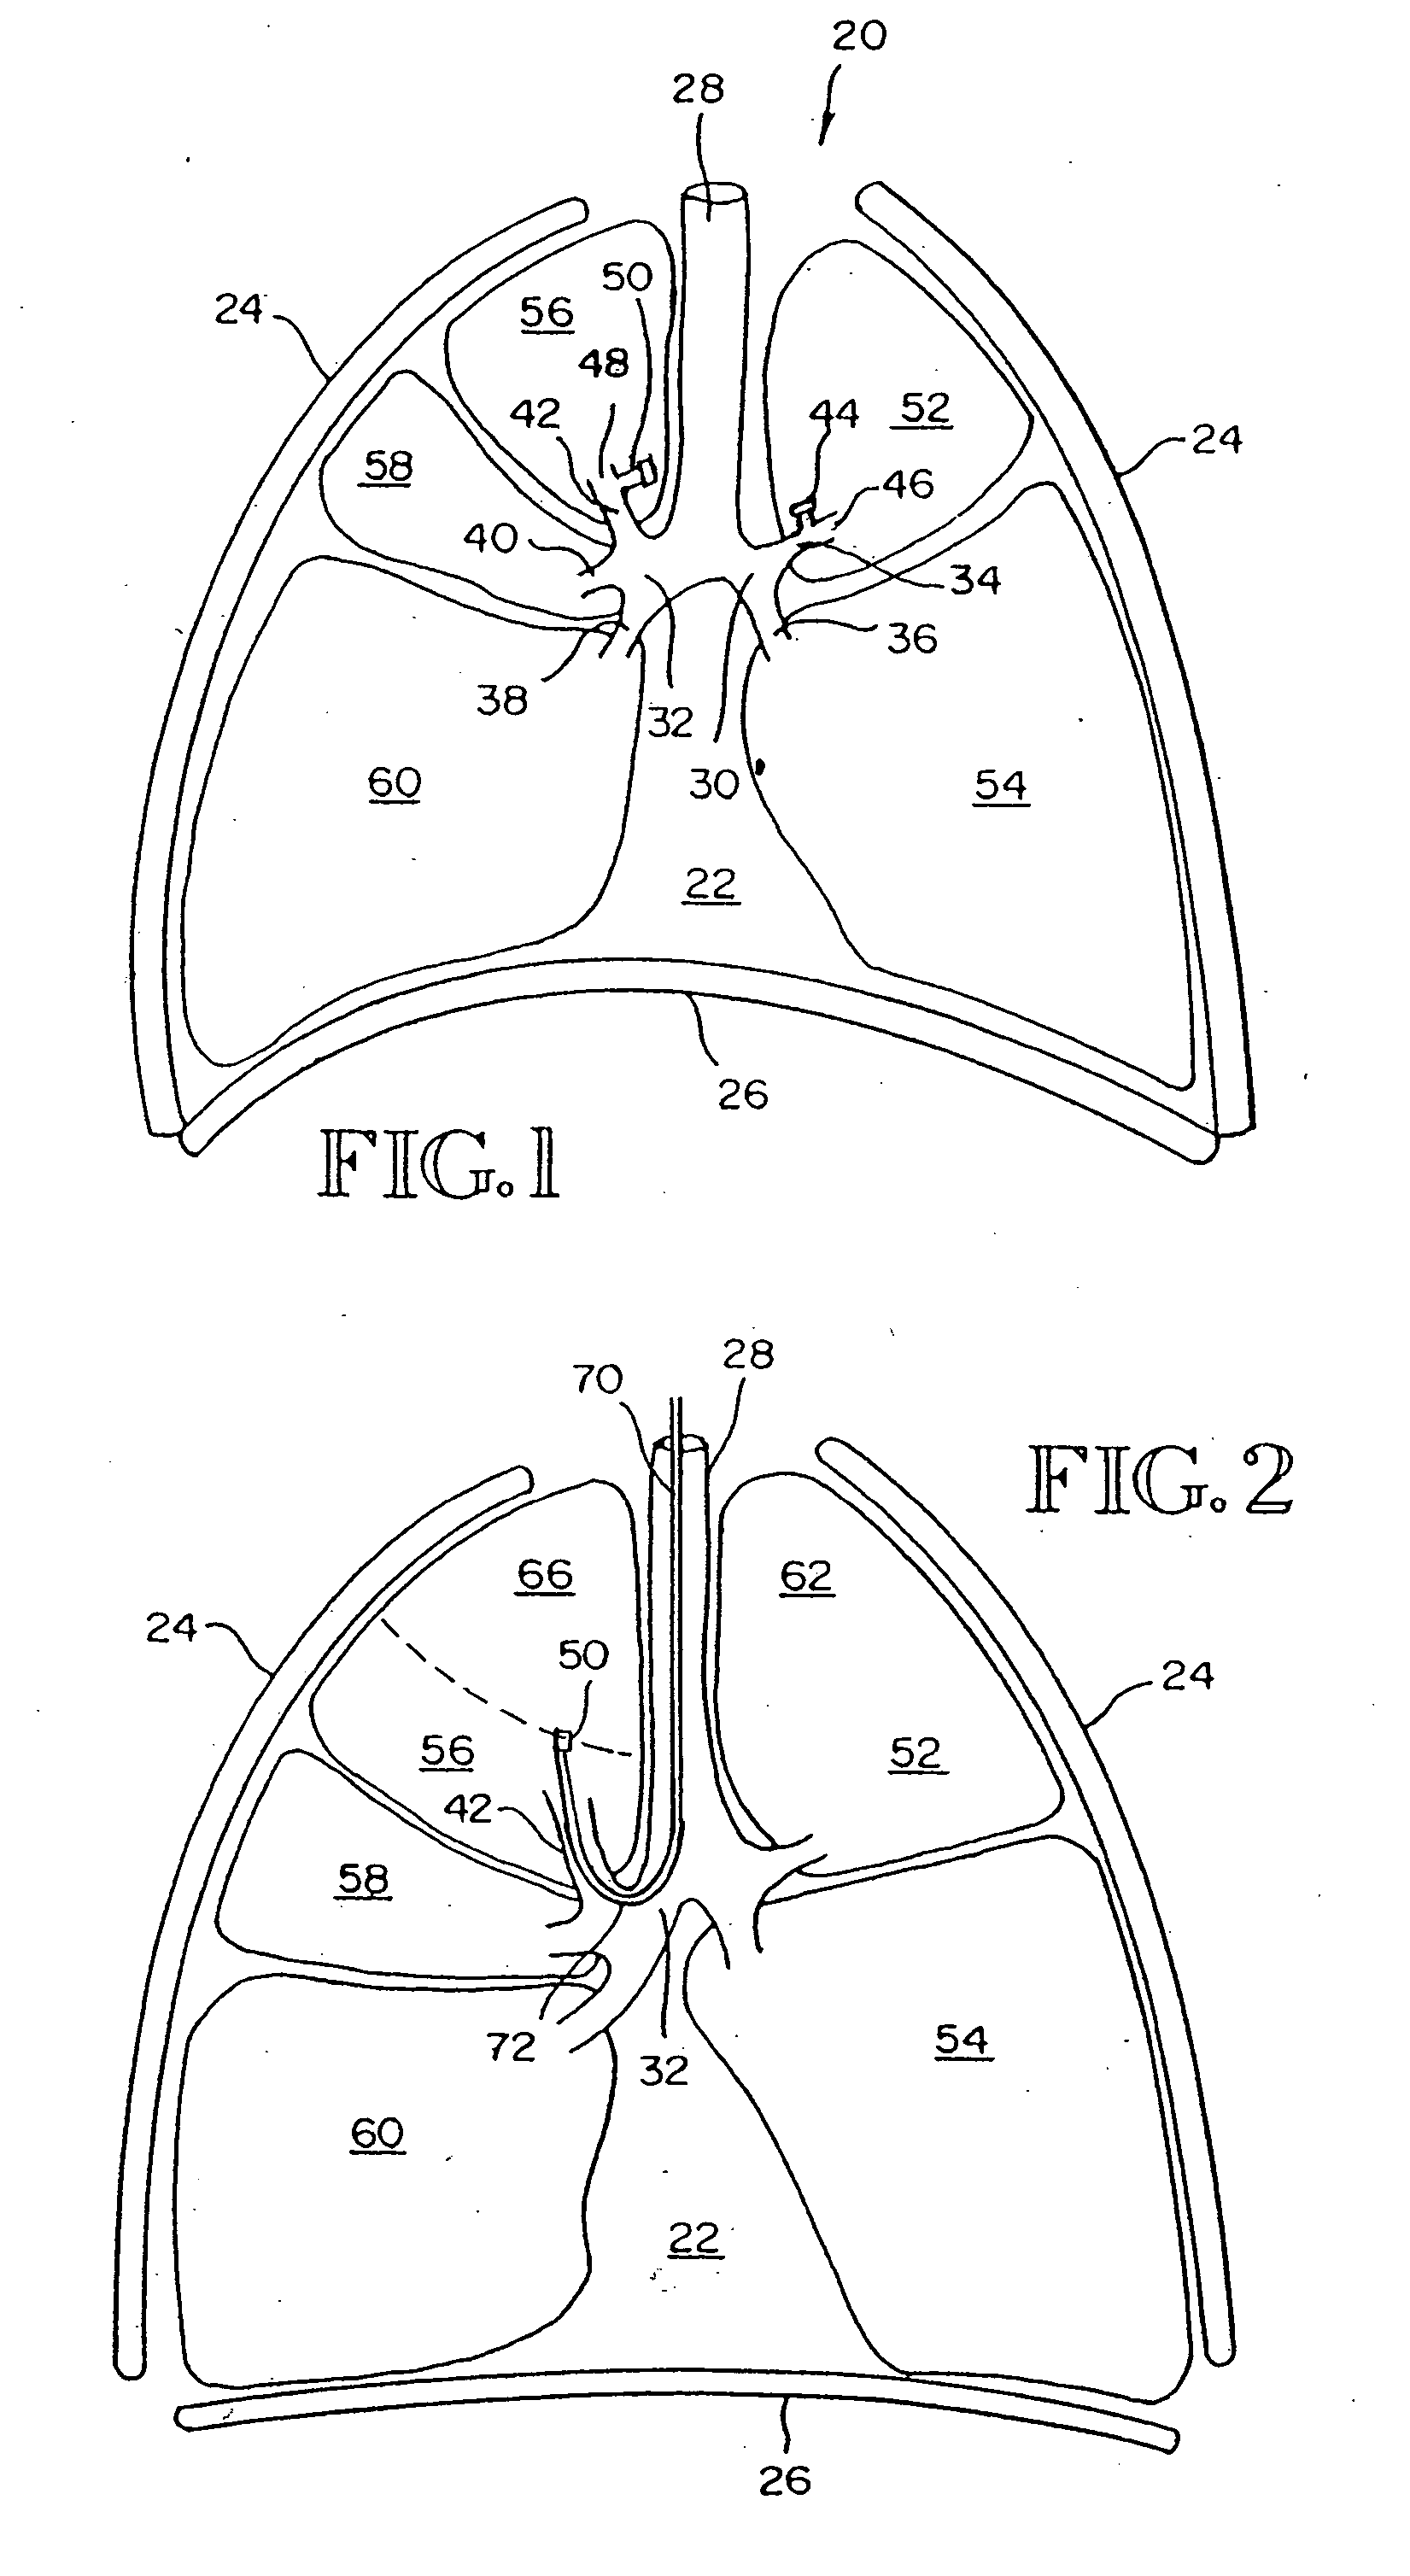 Intra-bronchial obstruction device that provides a medicant intra-bronchially to the patient